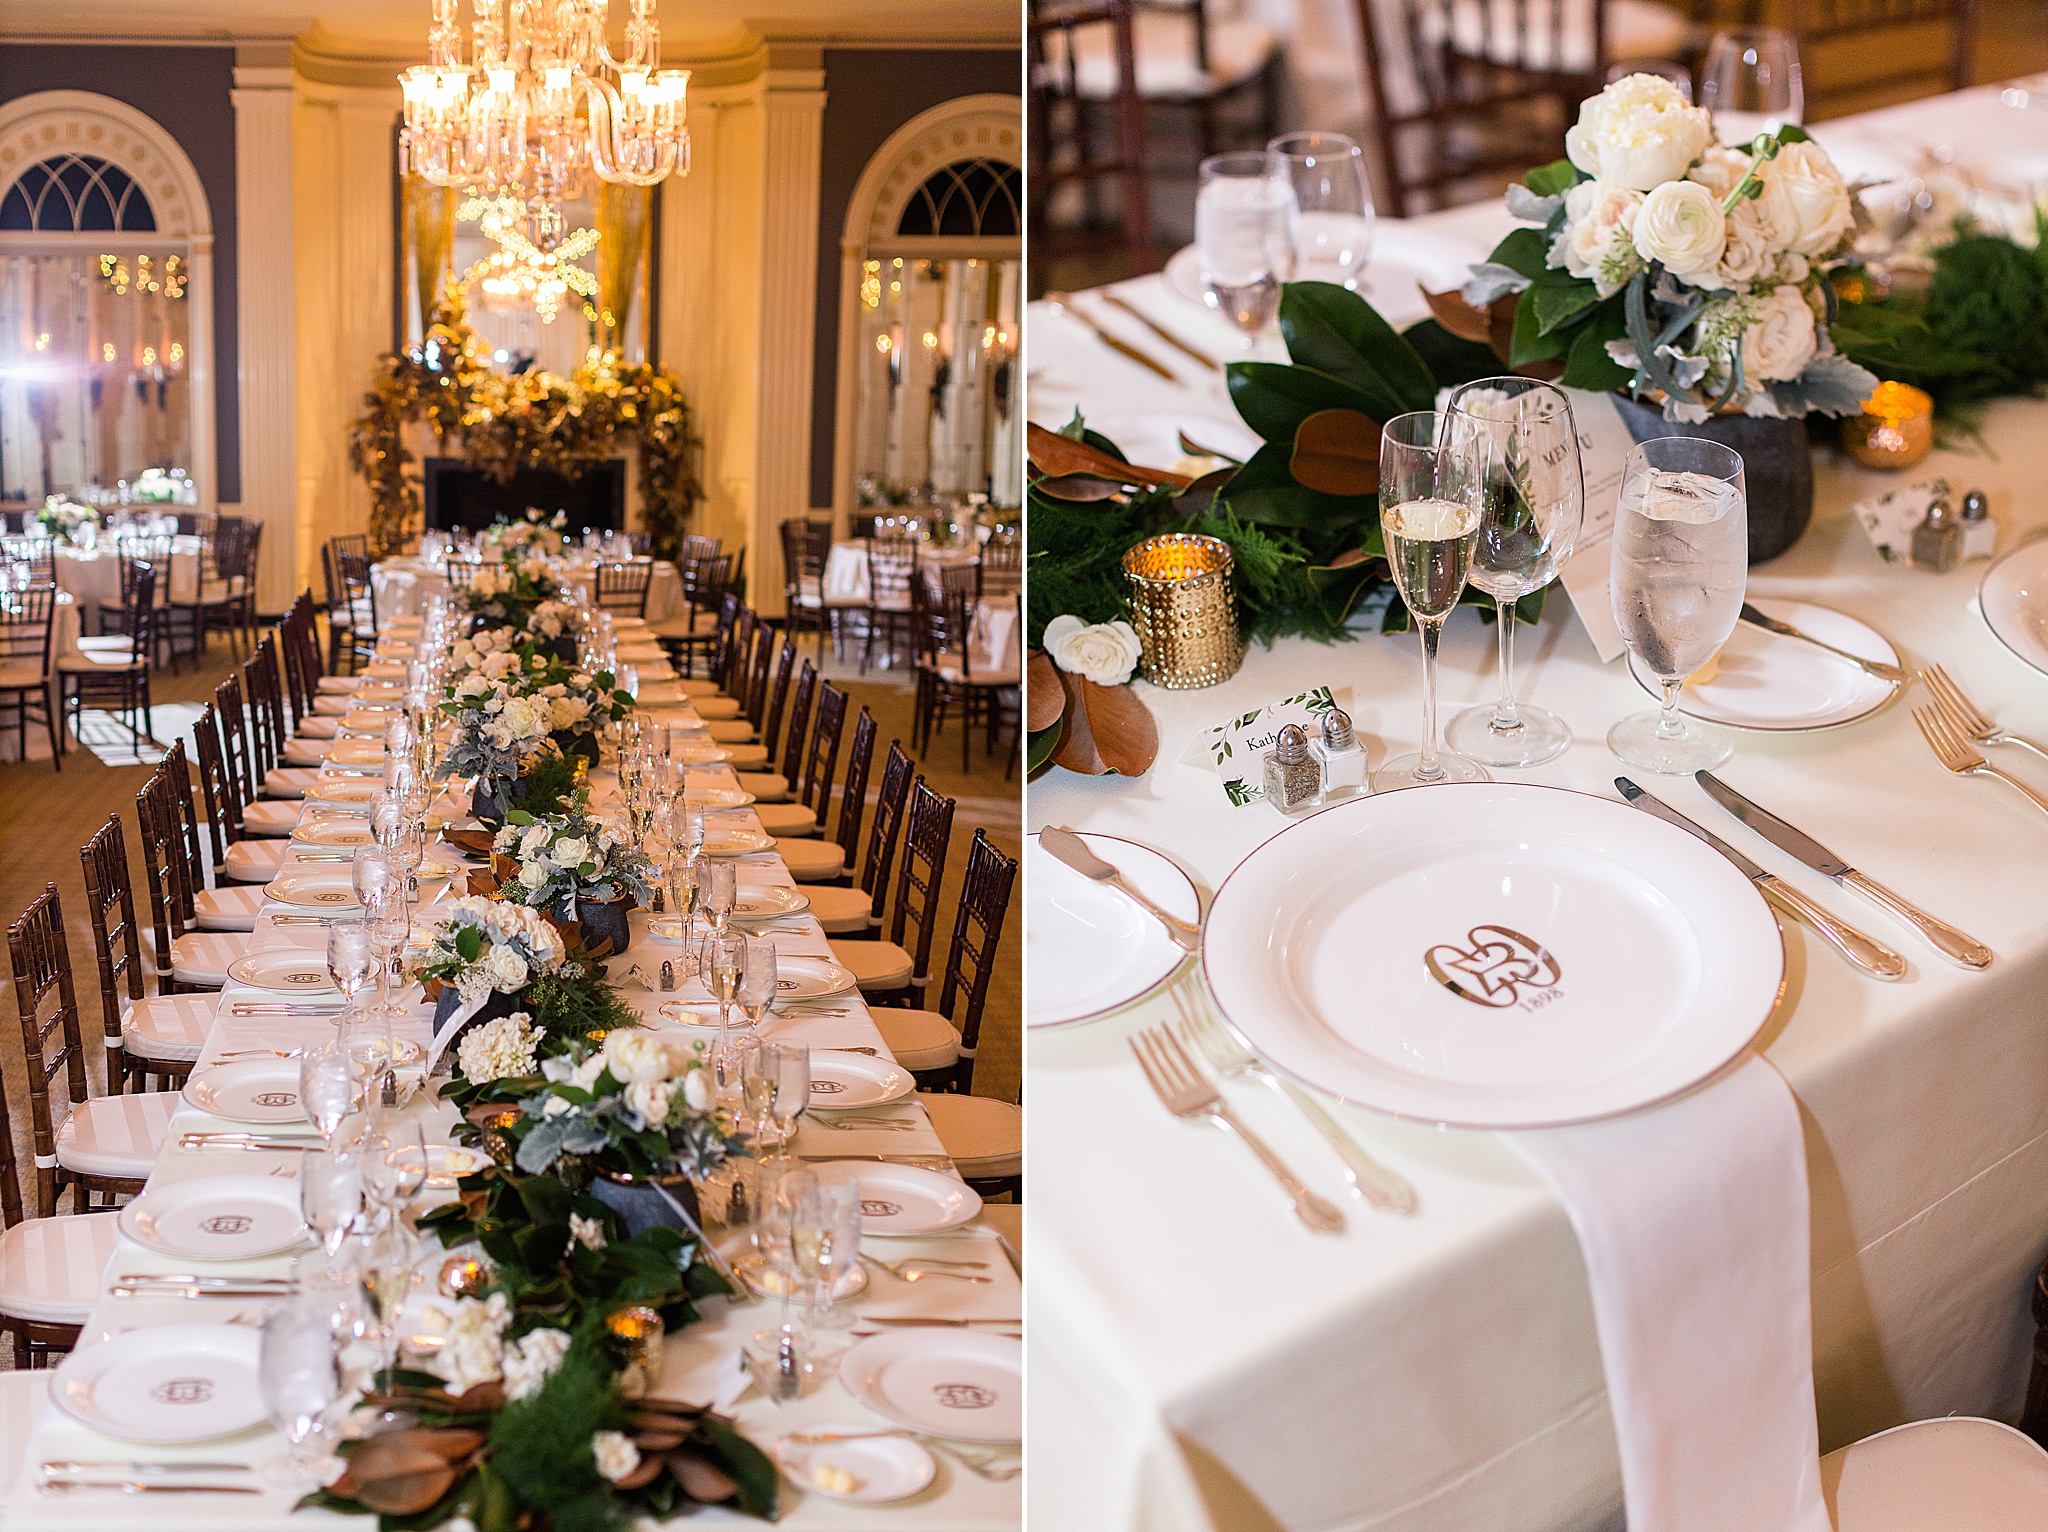 Baltimore Country Club wedding day photographed by Alexandra Mandato Photography